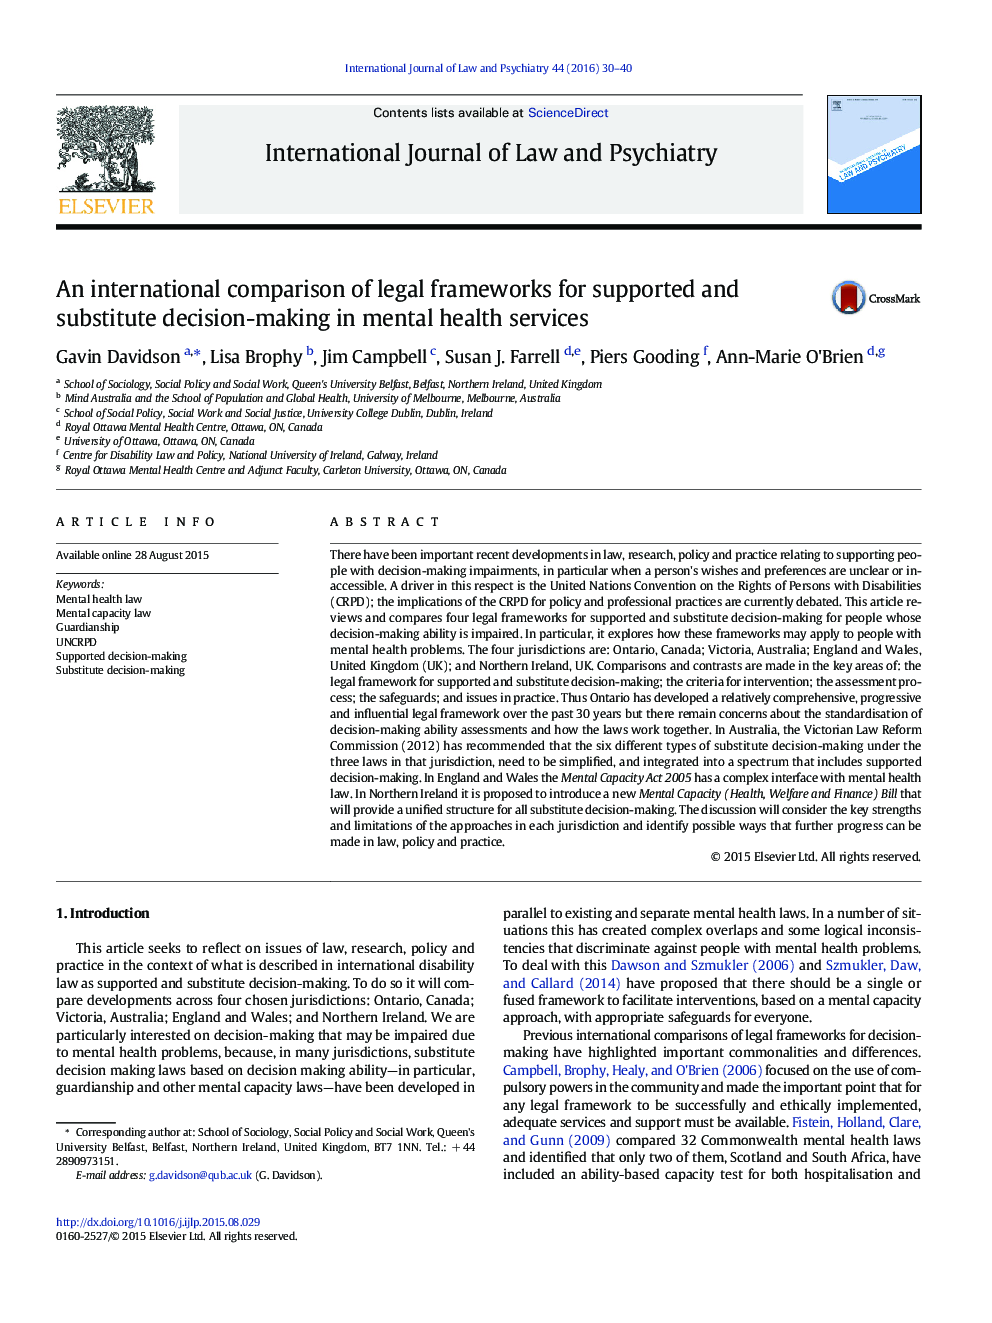 An international comparison of legal frameworks for supported and substitute decision-making in mental health services